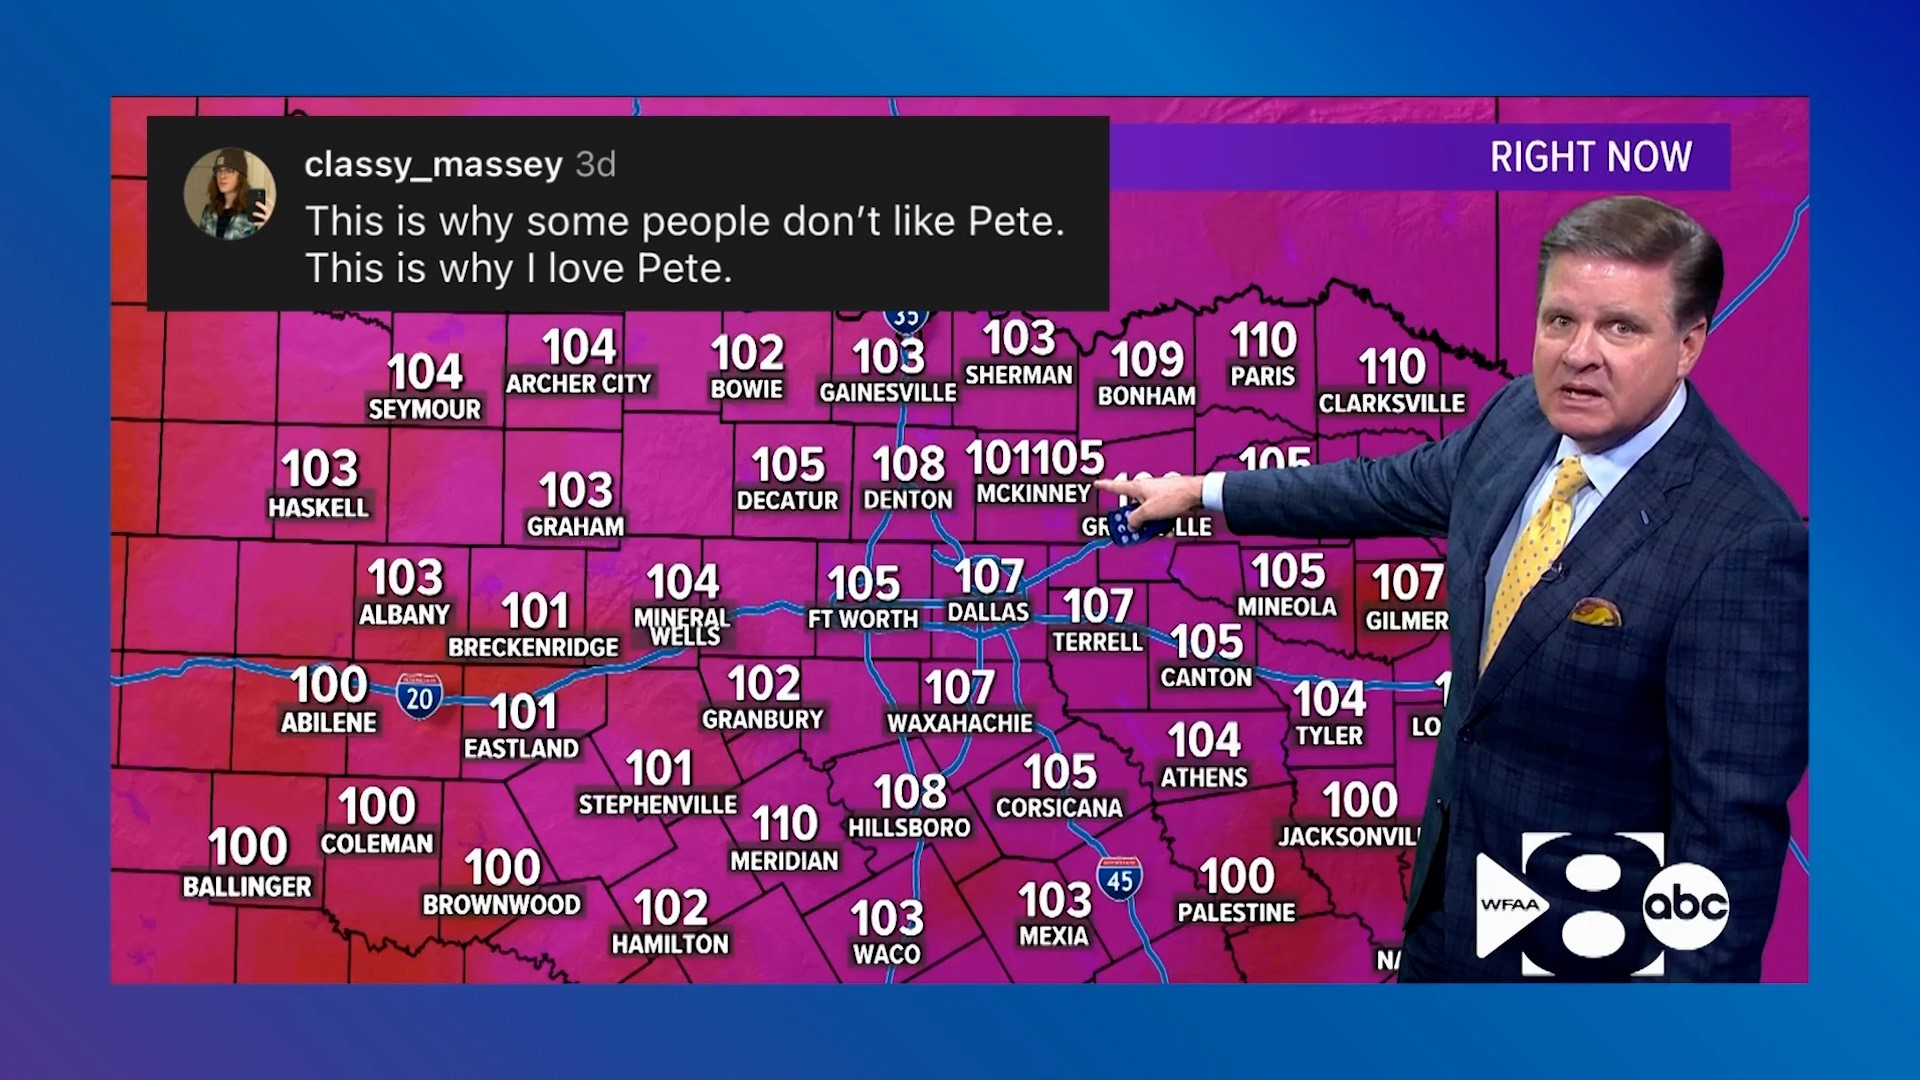 WFAA Meteorologist Pete Delkus had some fun with a typo on the heat index map. Don't worry, it was only 105.